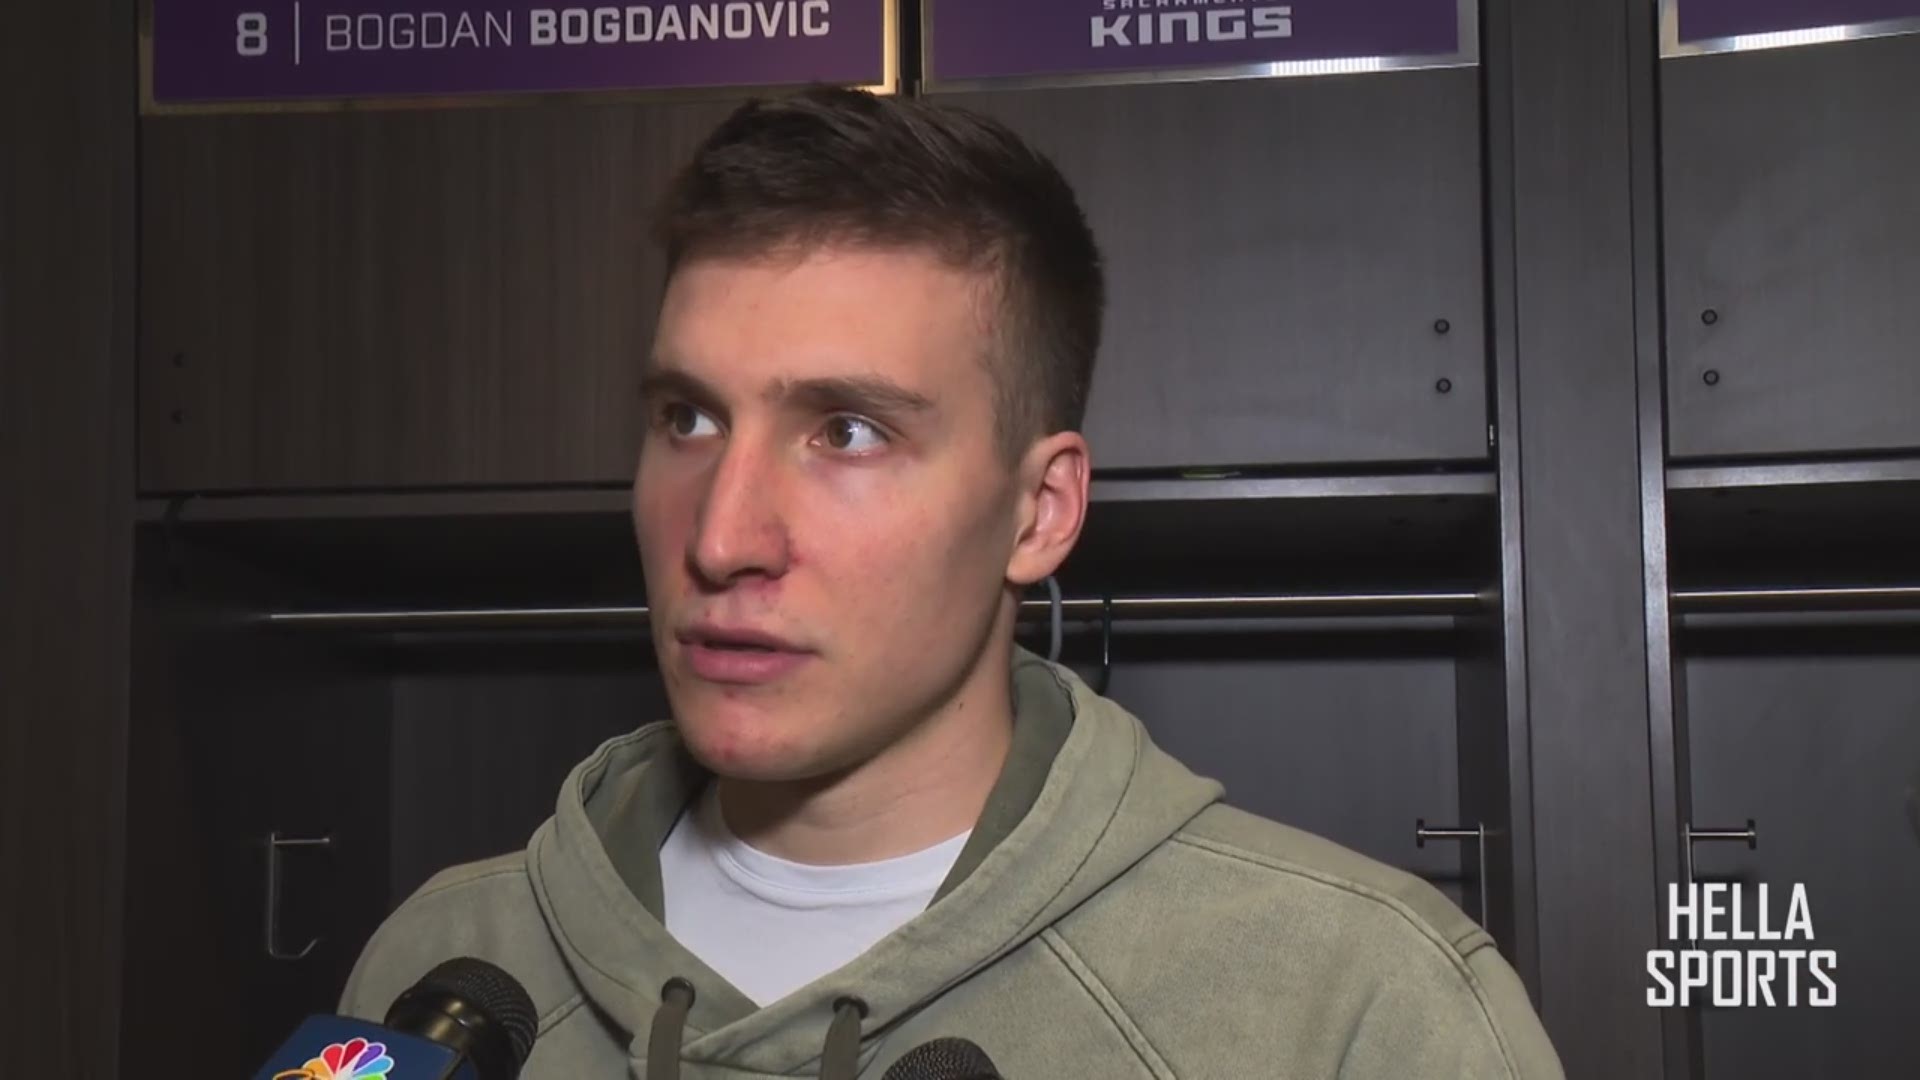 Kings guard Bogdan Bogdanovic discusses Friday’s victory over the Miami Heat, his 23 point performance to lead Sacramento to their fifth win in their last seven game